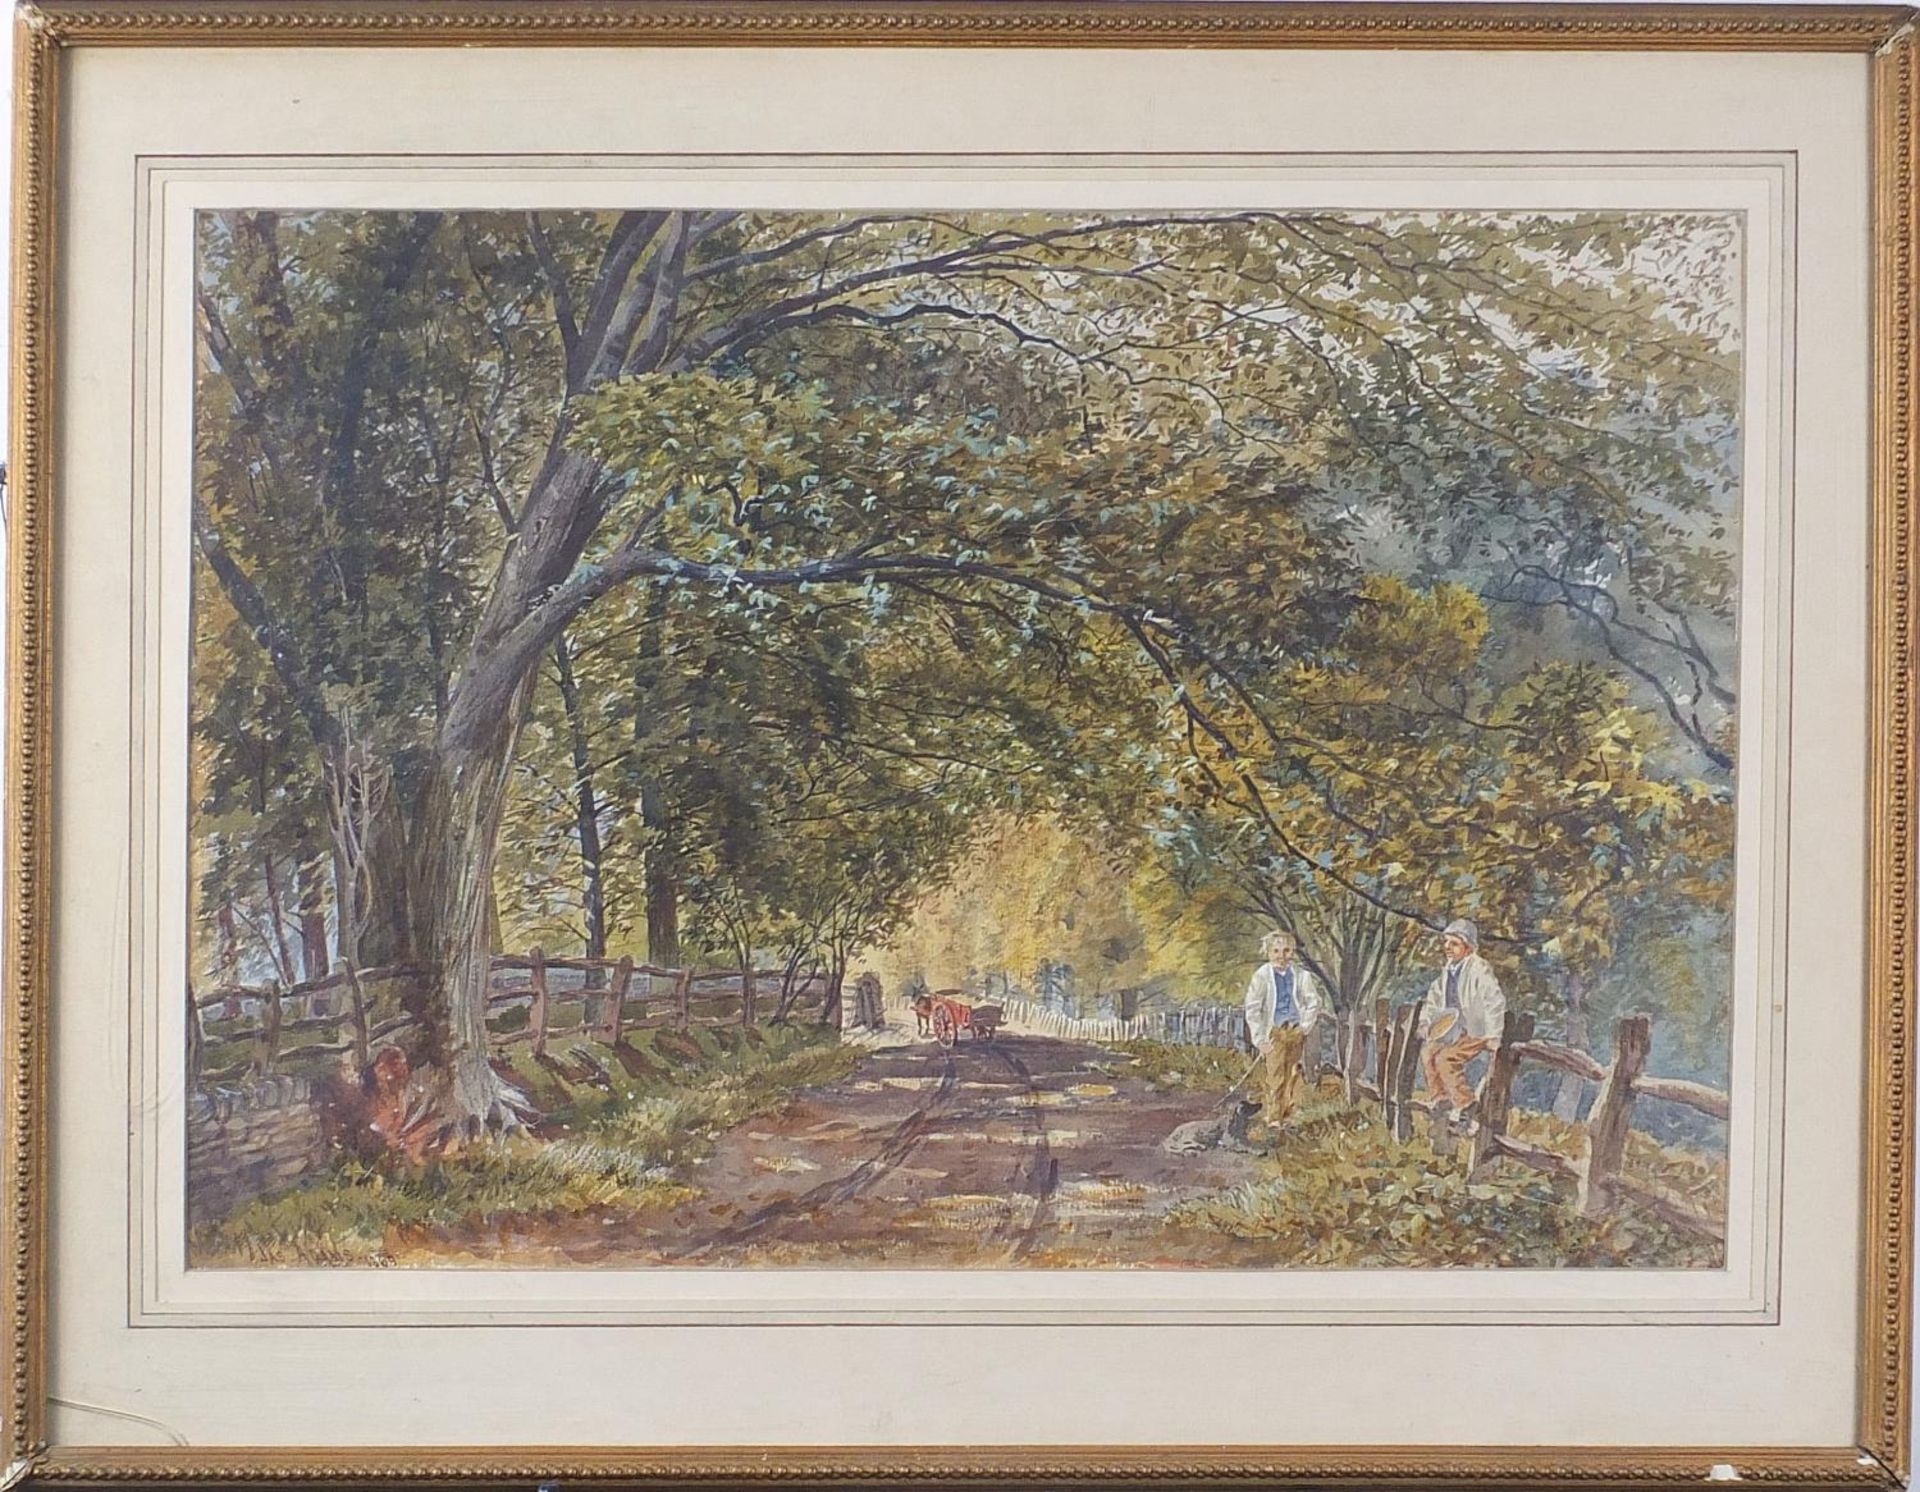 James Adams - Figures beside a lane and trees, 19th century watercolour, mounted, framed and glazed, - Image 2 of 4